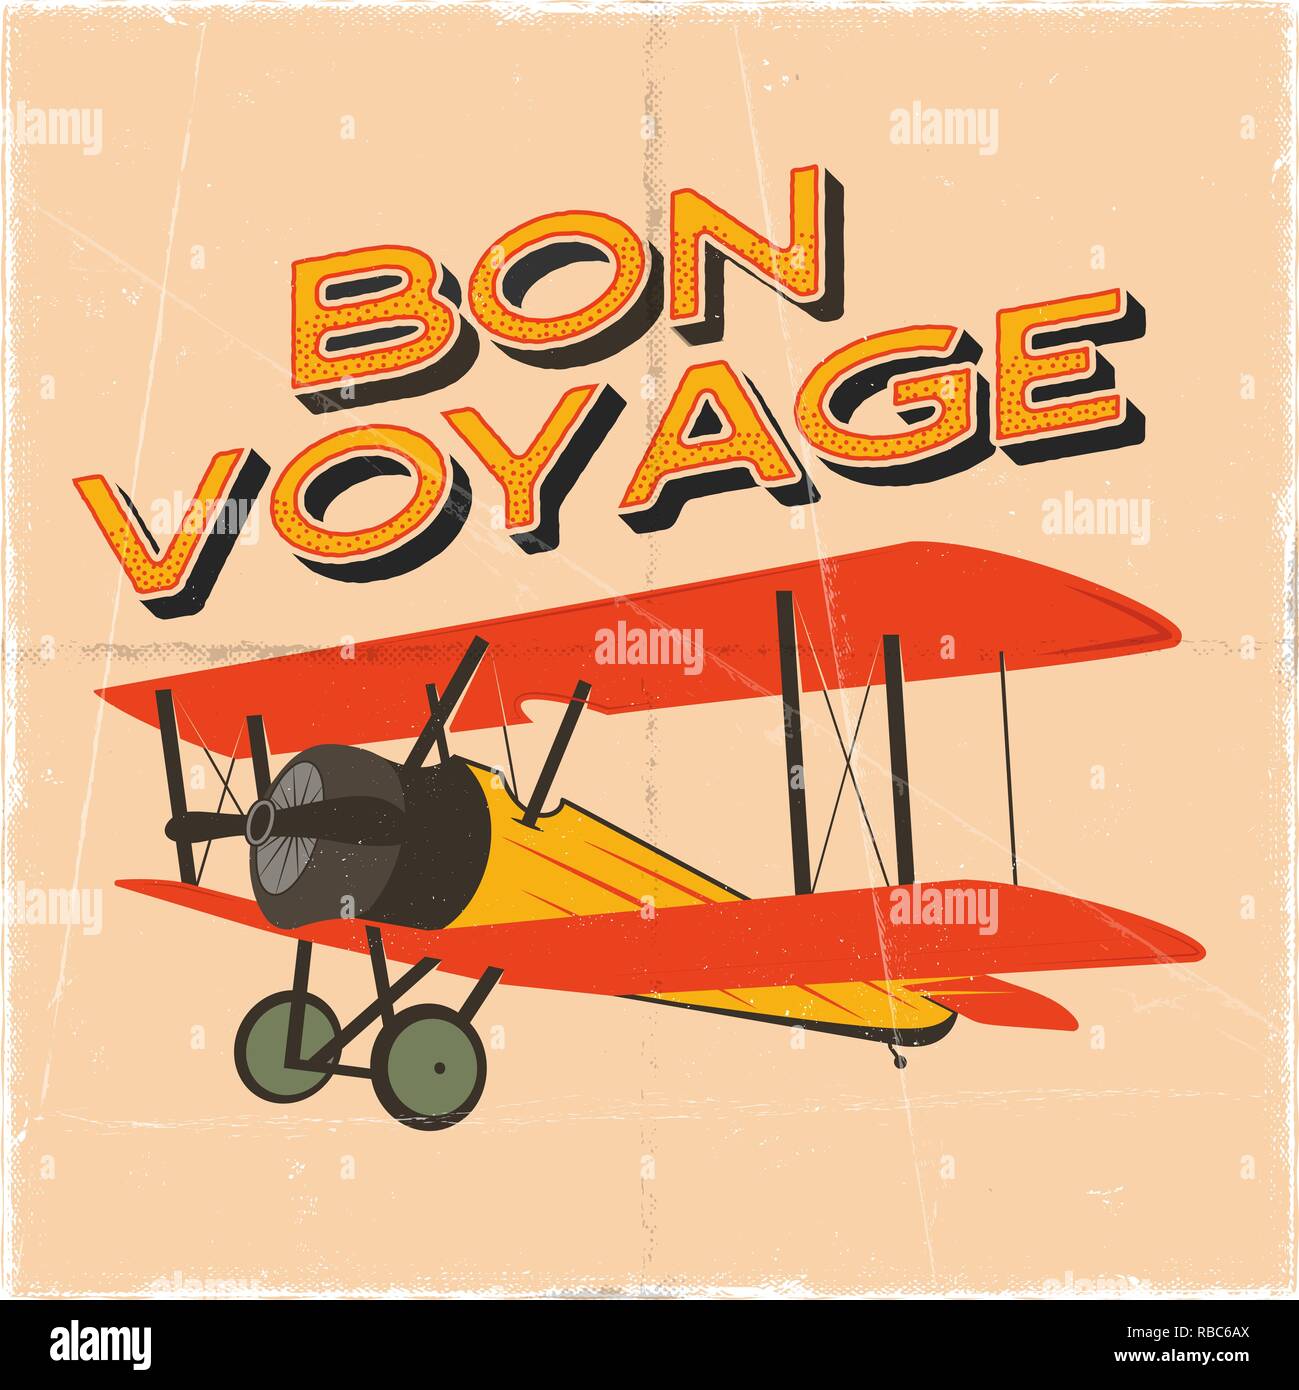 Flight Poster In Retro Style Bon Voyage Quote Vintage Hand Drawn Travel Airplane Design For T Shirt Mug Emblem Or Patch Stock Vector Retro Illustration With Biplane And Text Stock Vector Image